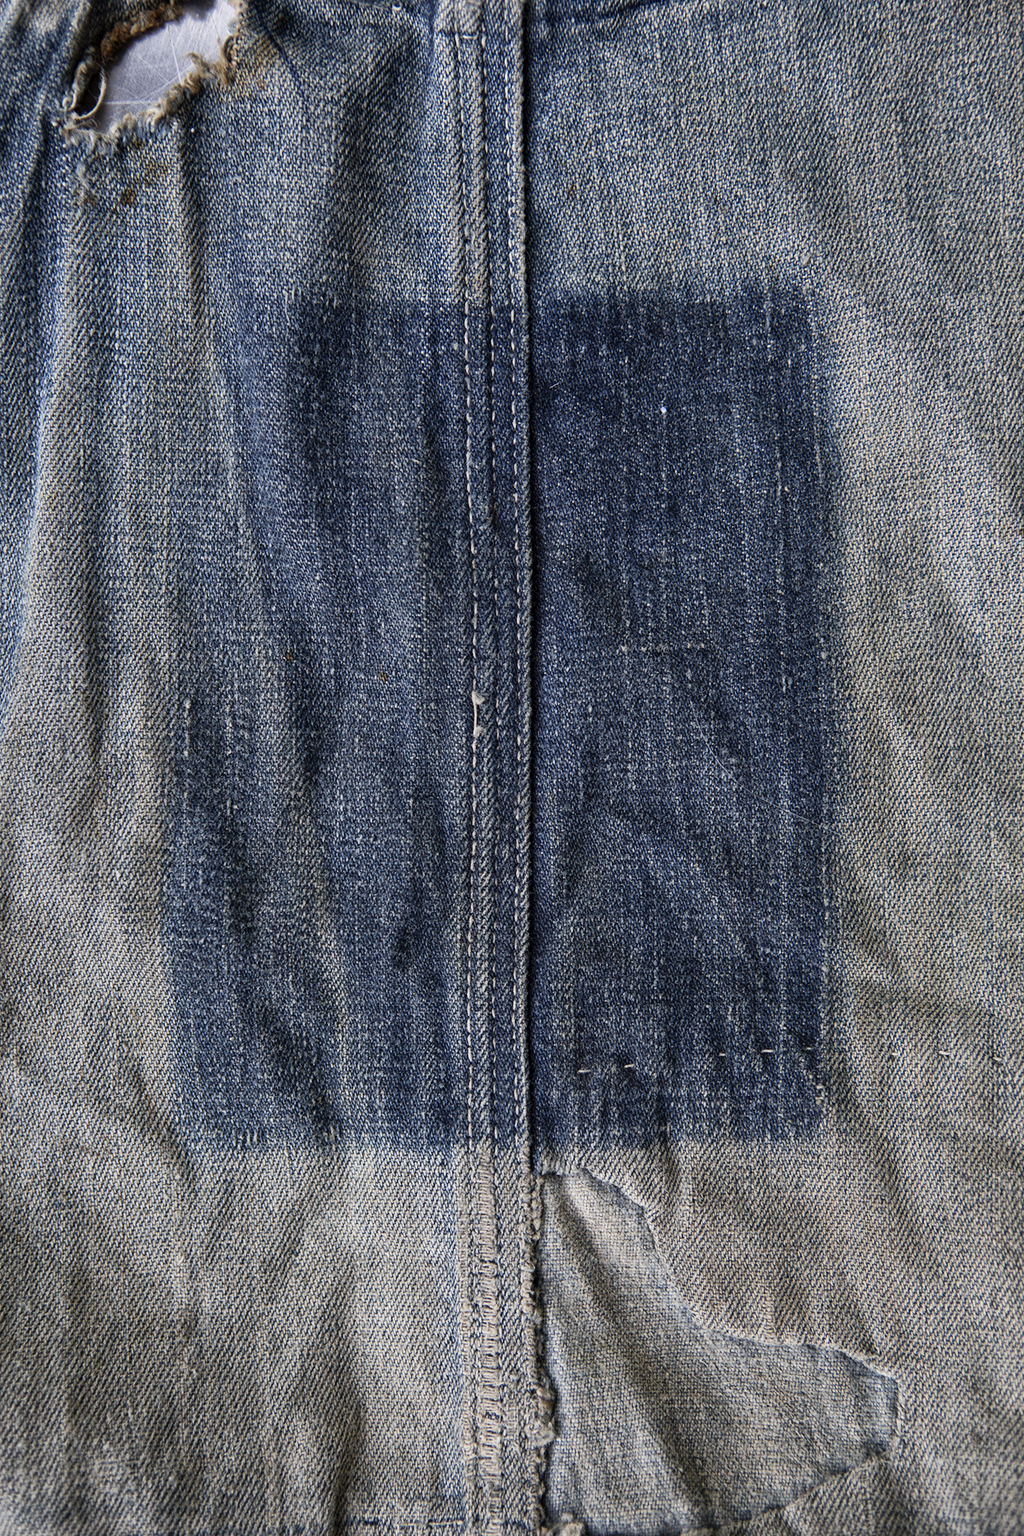 Banditphotographer Blog: Turn of the Century patched overalls found in NC.